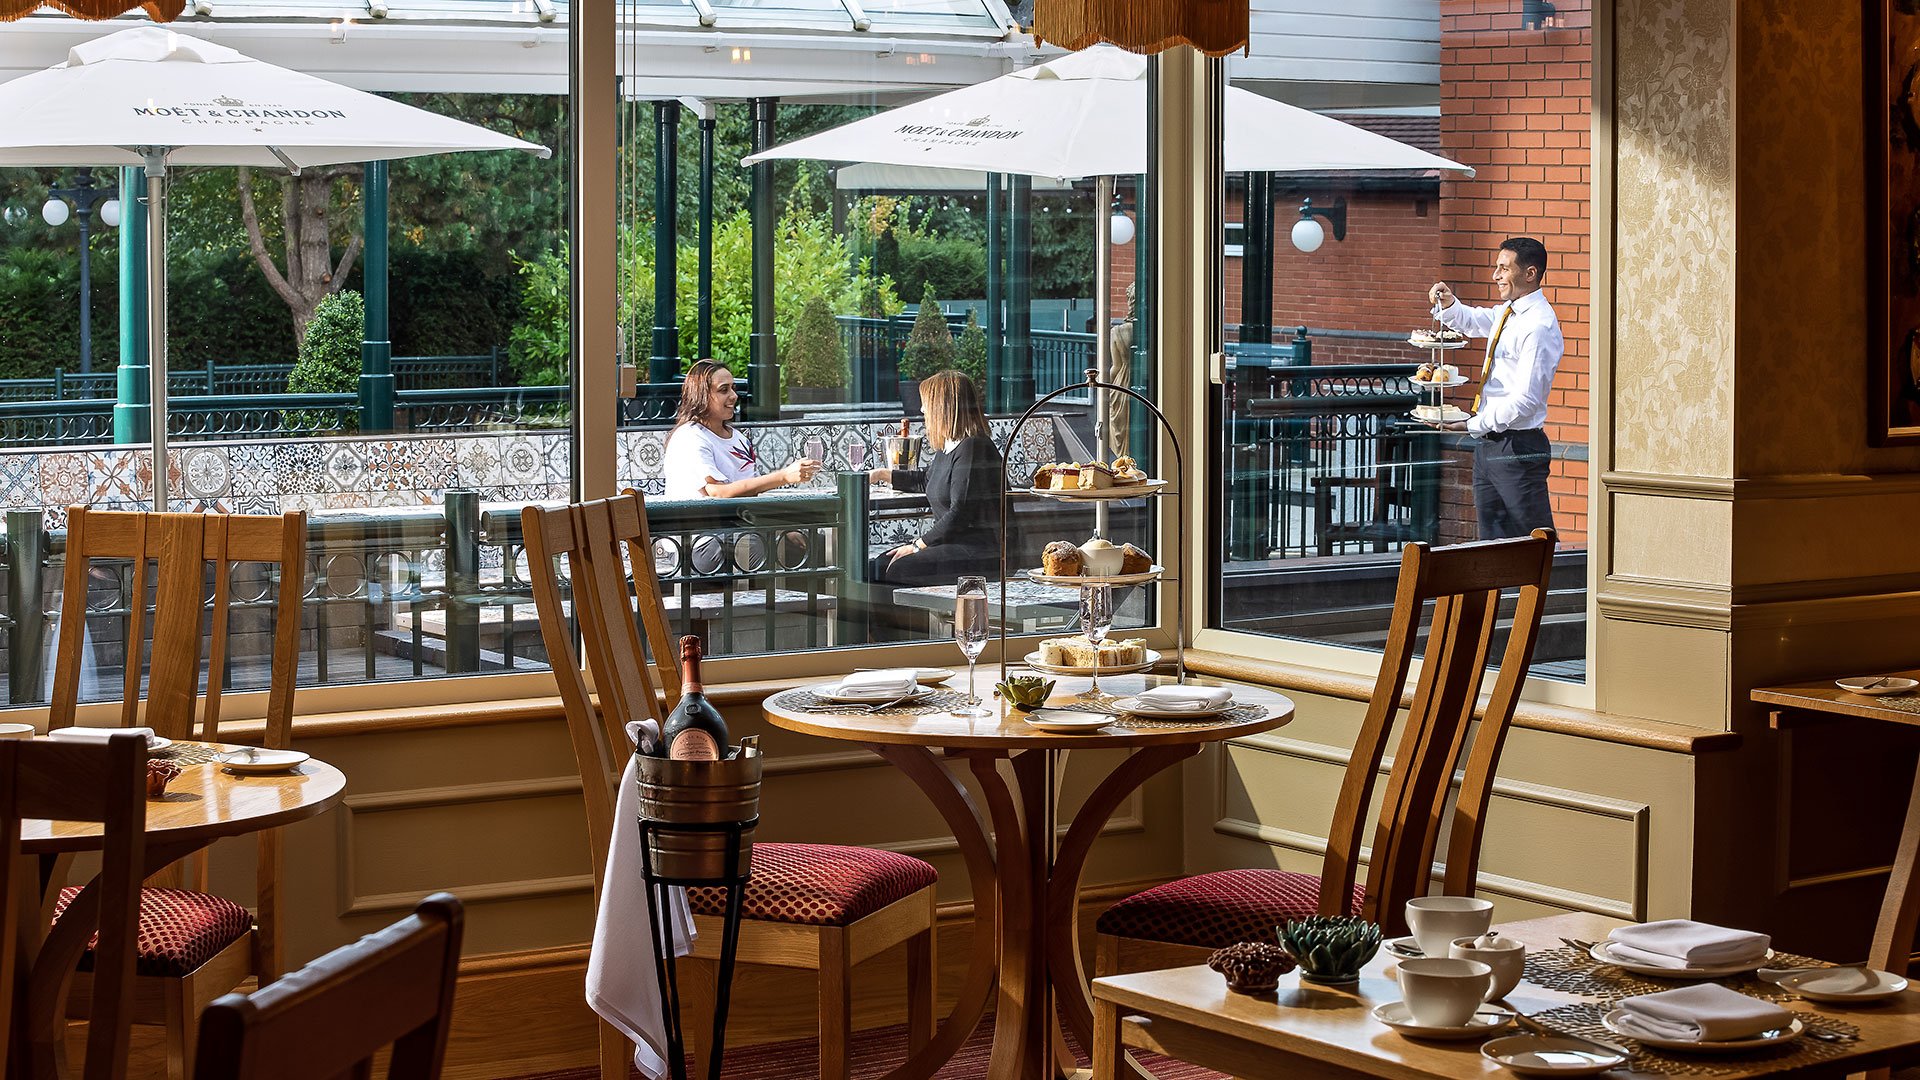 Afternoon tea and chilled Champagne in Restaurant 178 with views over the patio - Fairlawns Hotel & Spa, Walsall